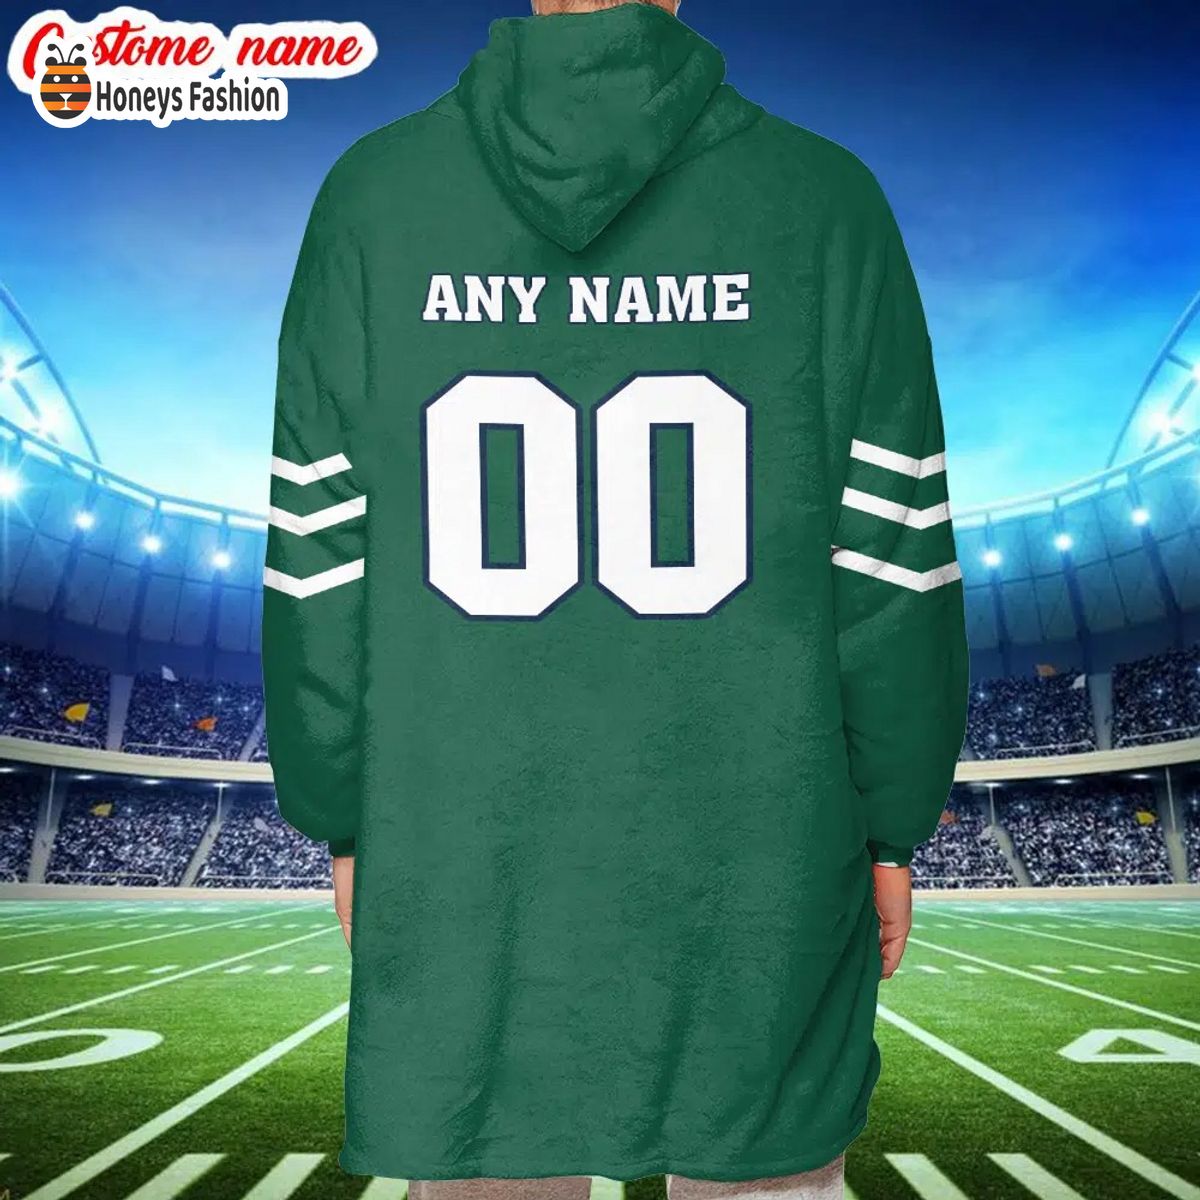 New York Jets NFL Adidas all day i dream about Jets blanket hoodie